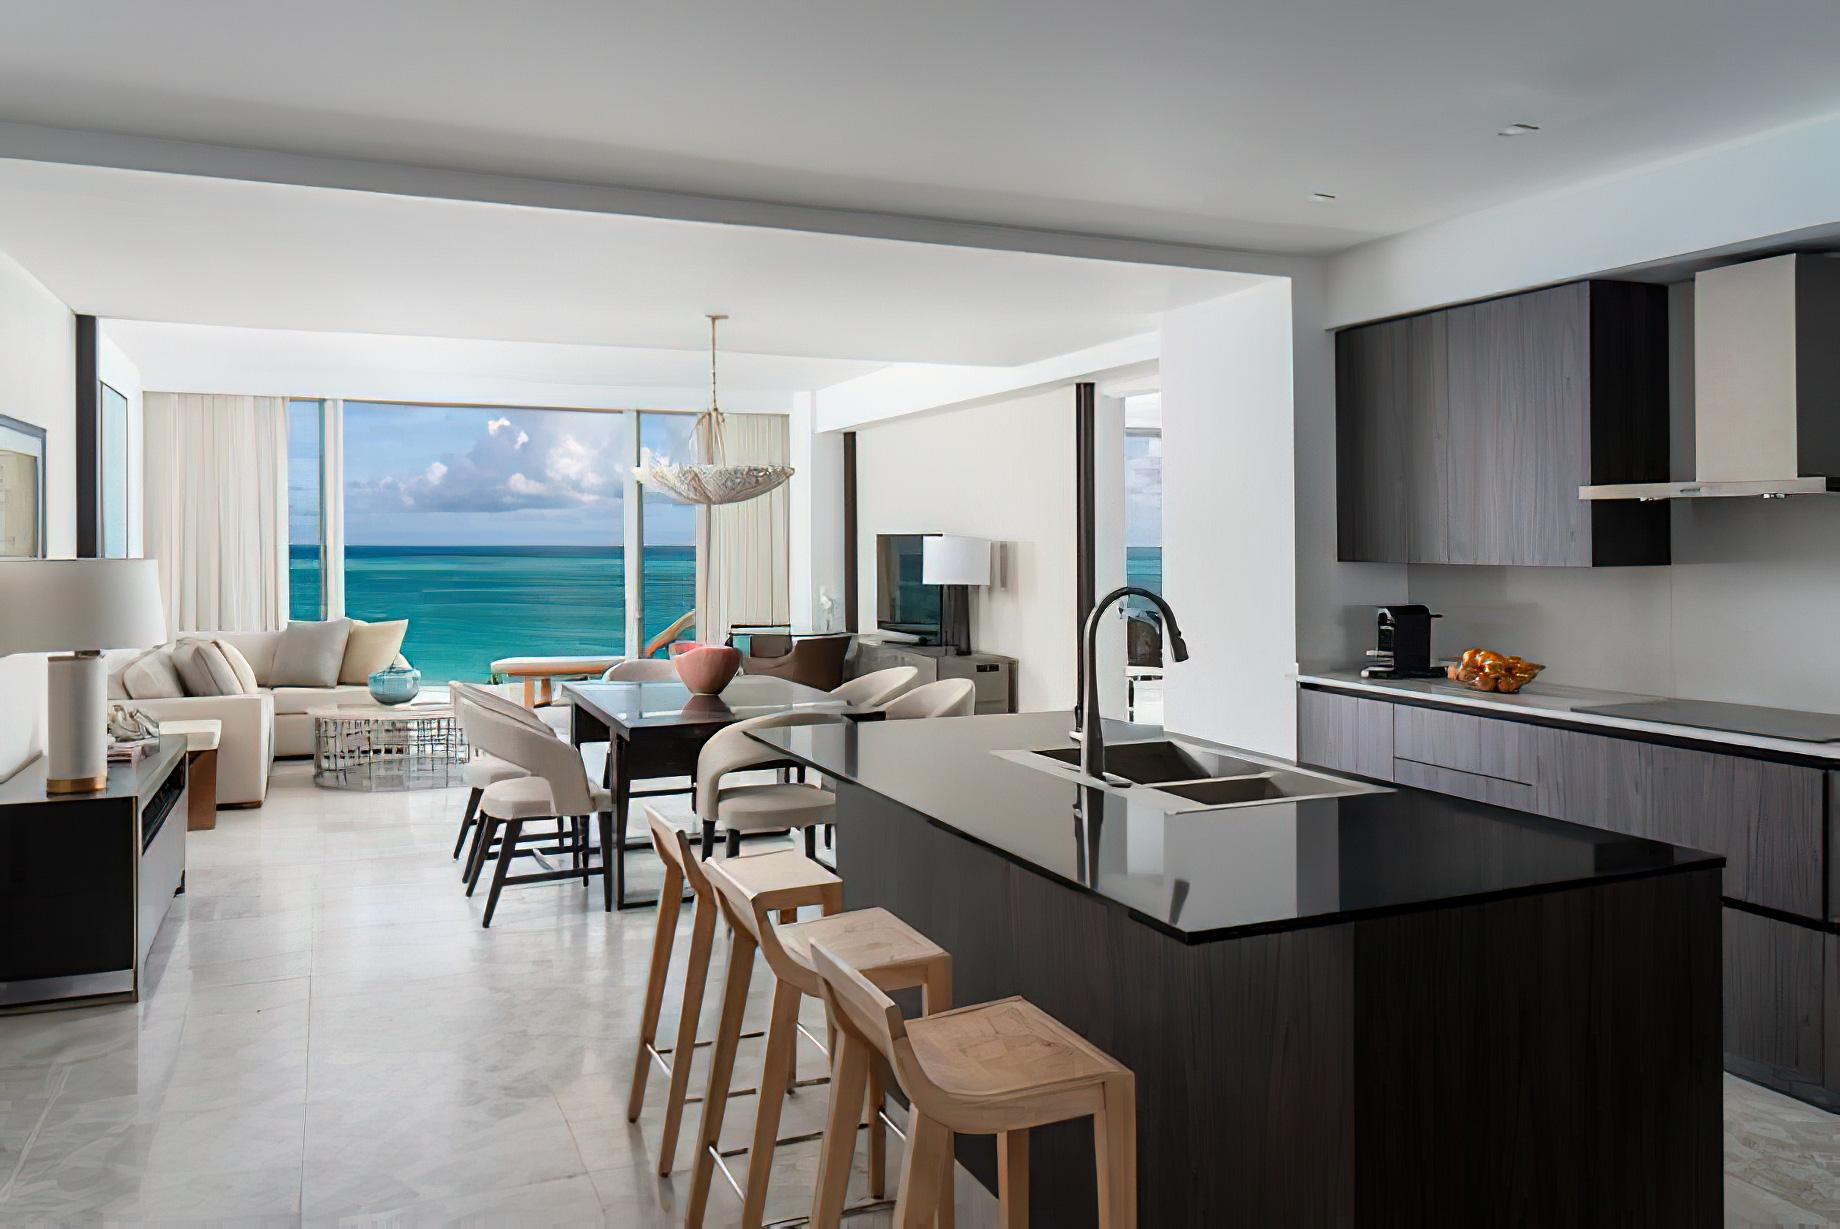 The Ritz-Carlton, Turks & Caicos Resort – Providenciales, Turks and Caicos Islands – Residence Kitchen